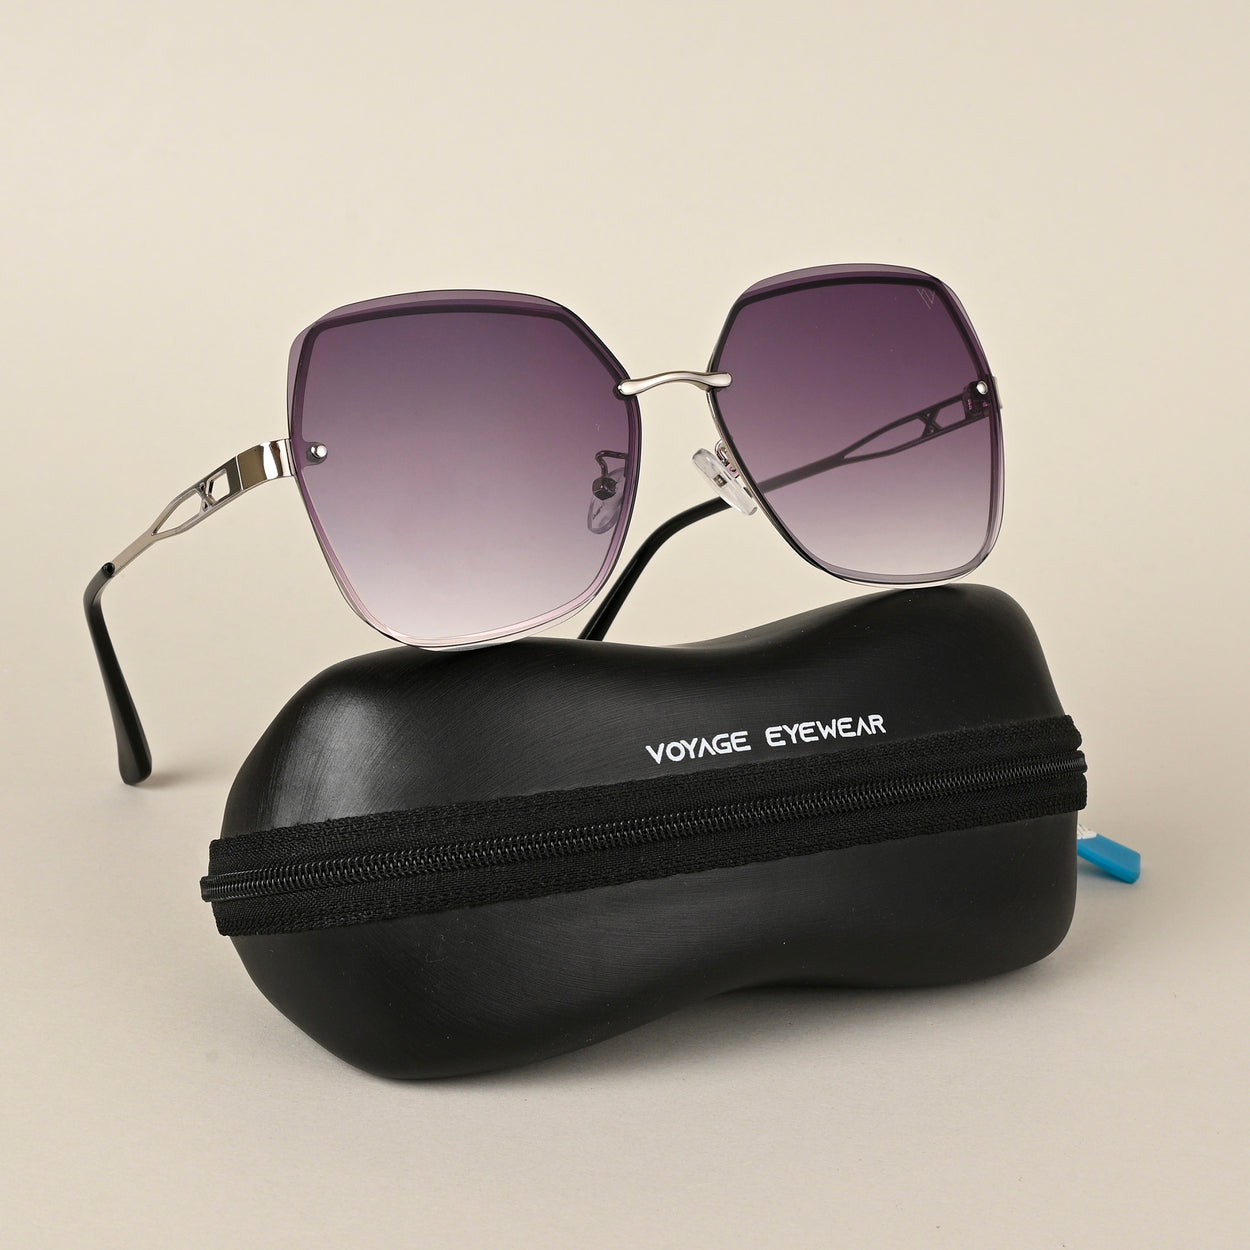 Voyage Grey Oversize Sunglasses for Women - MG4319